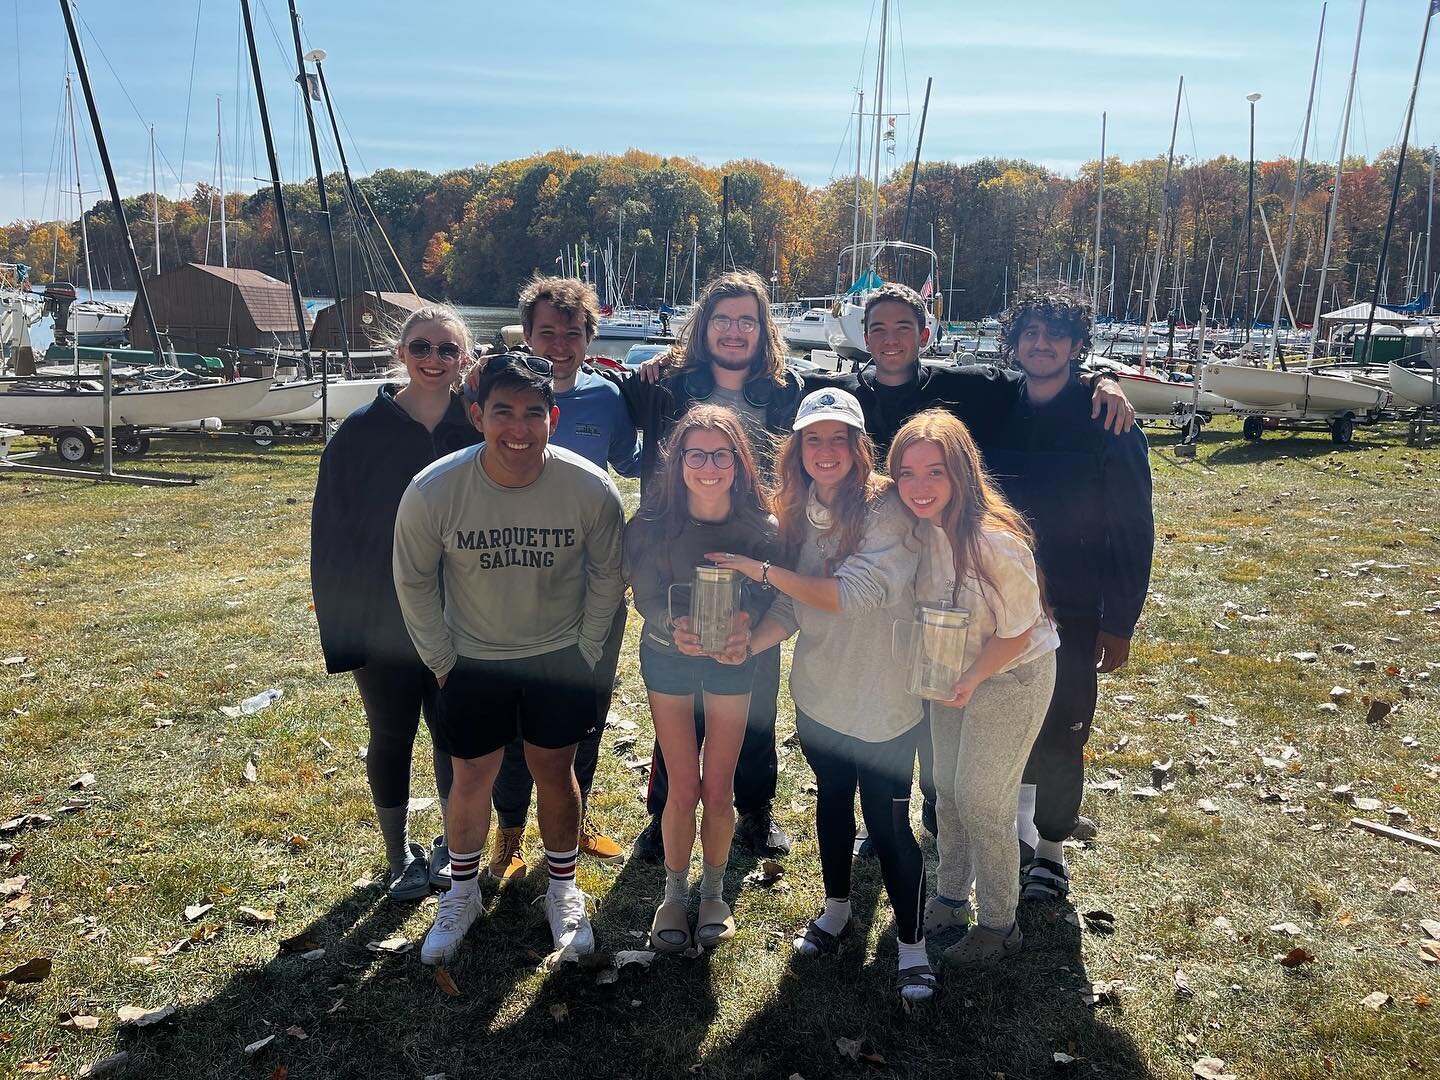 Marquette sailing had an awesome weekend of racing at Boiler Cup and Emma B. Marquette took 1st overall and 3rd overall at Boiler Cup, and 6th overall at Emma B. Thanks to Purdue and Hope for hosting! #MUST